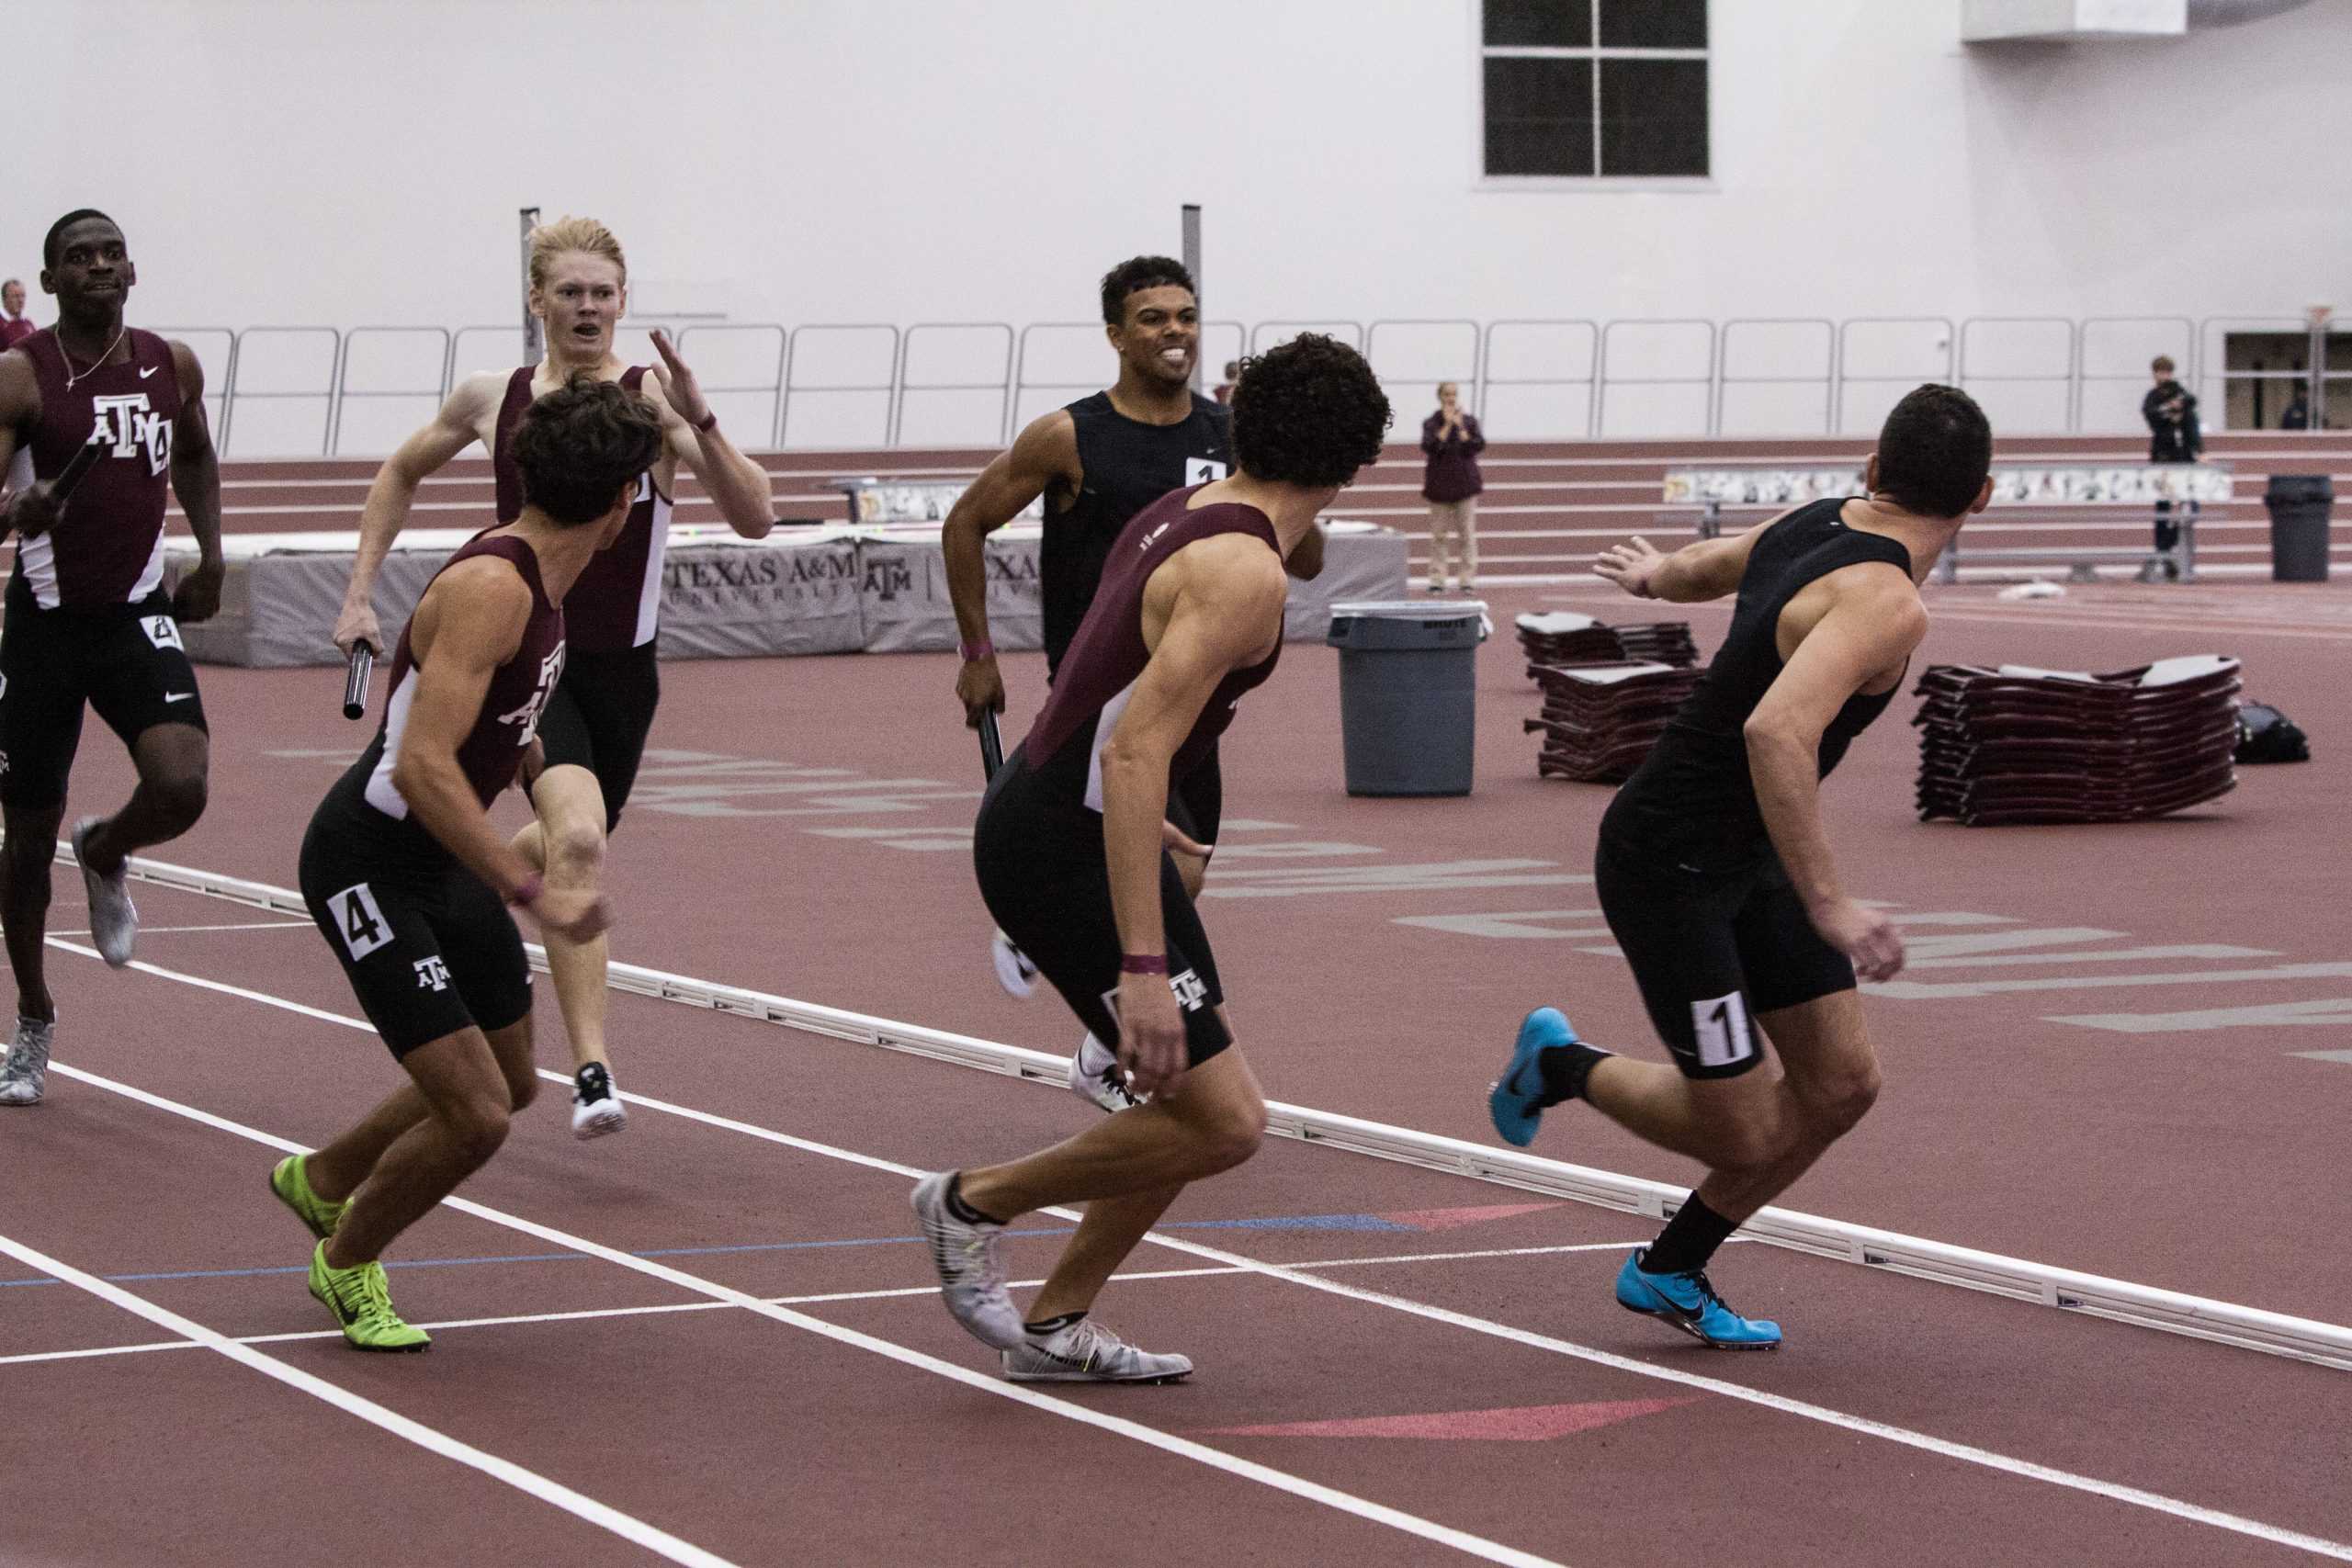 Men's track win invitational ahead of Texas, women finish second behind ...